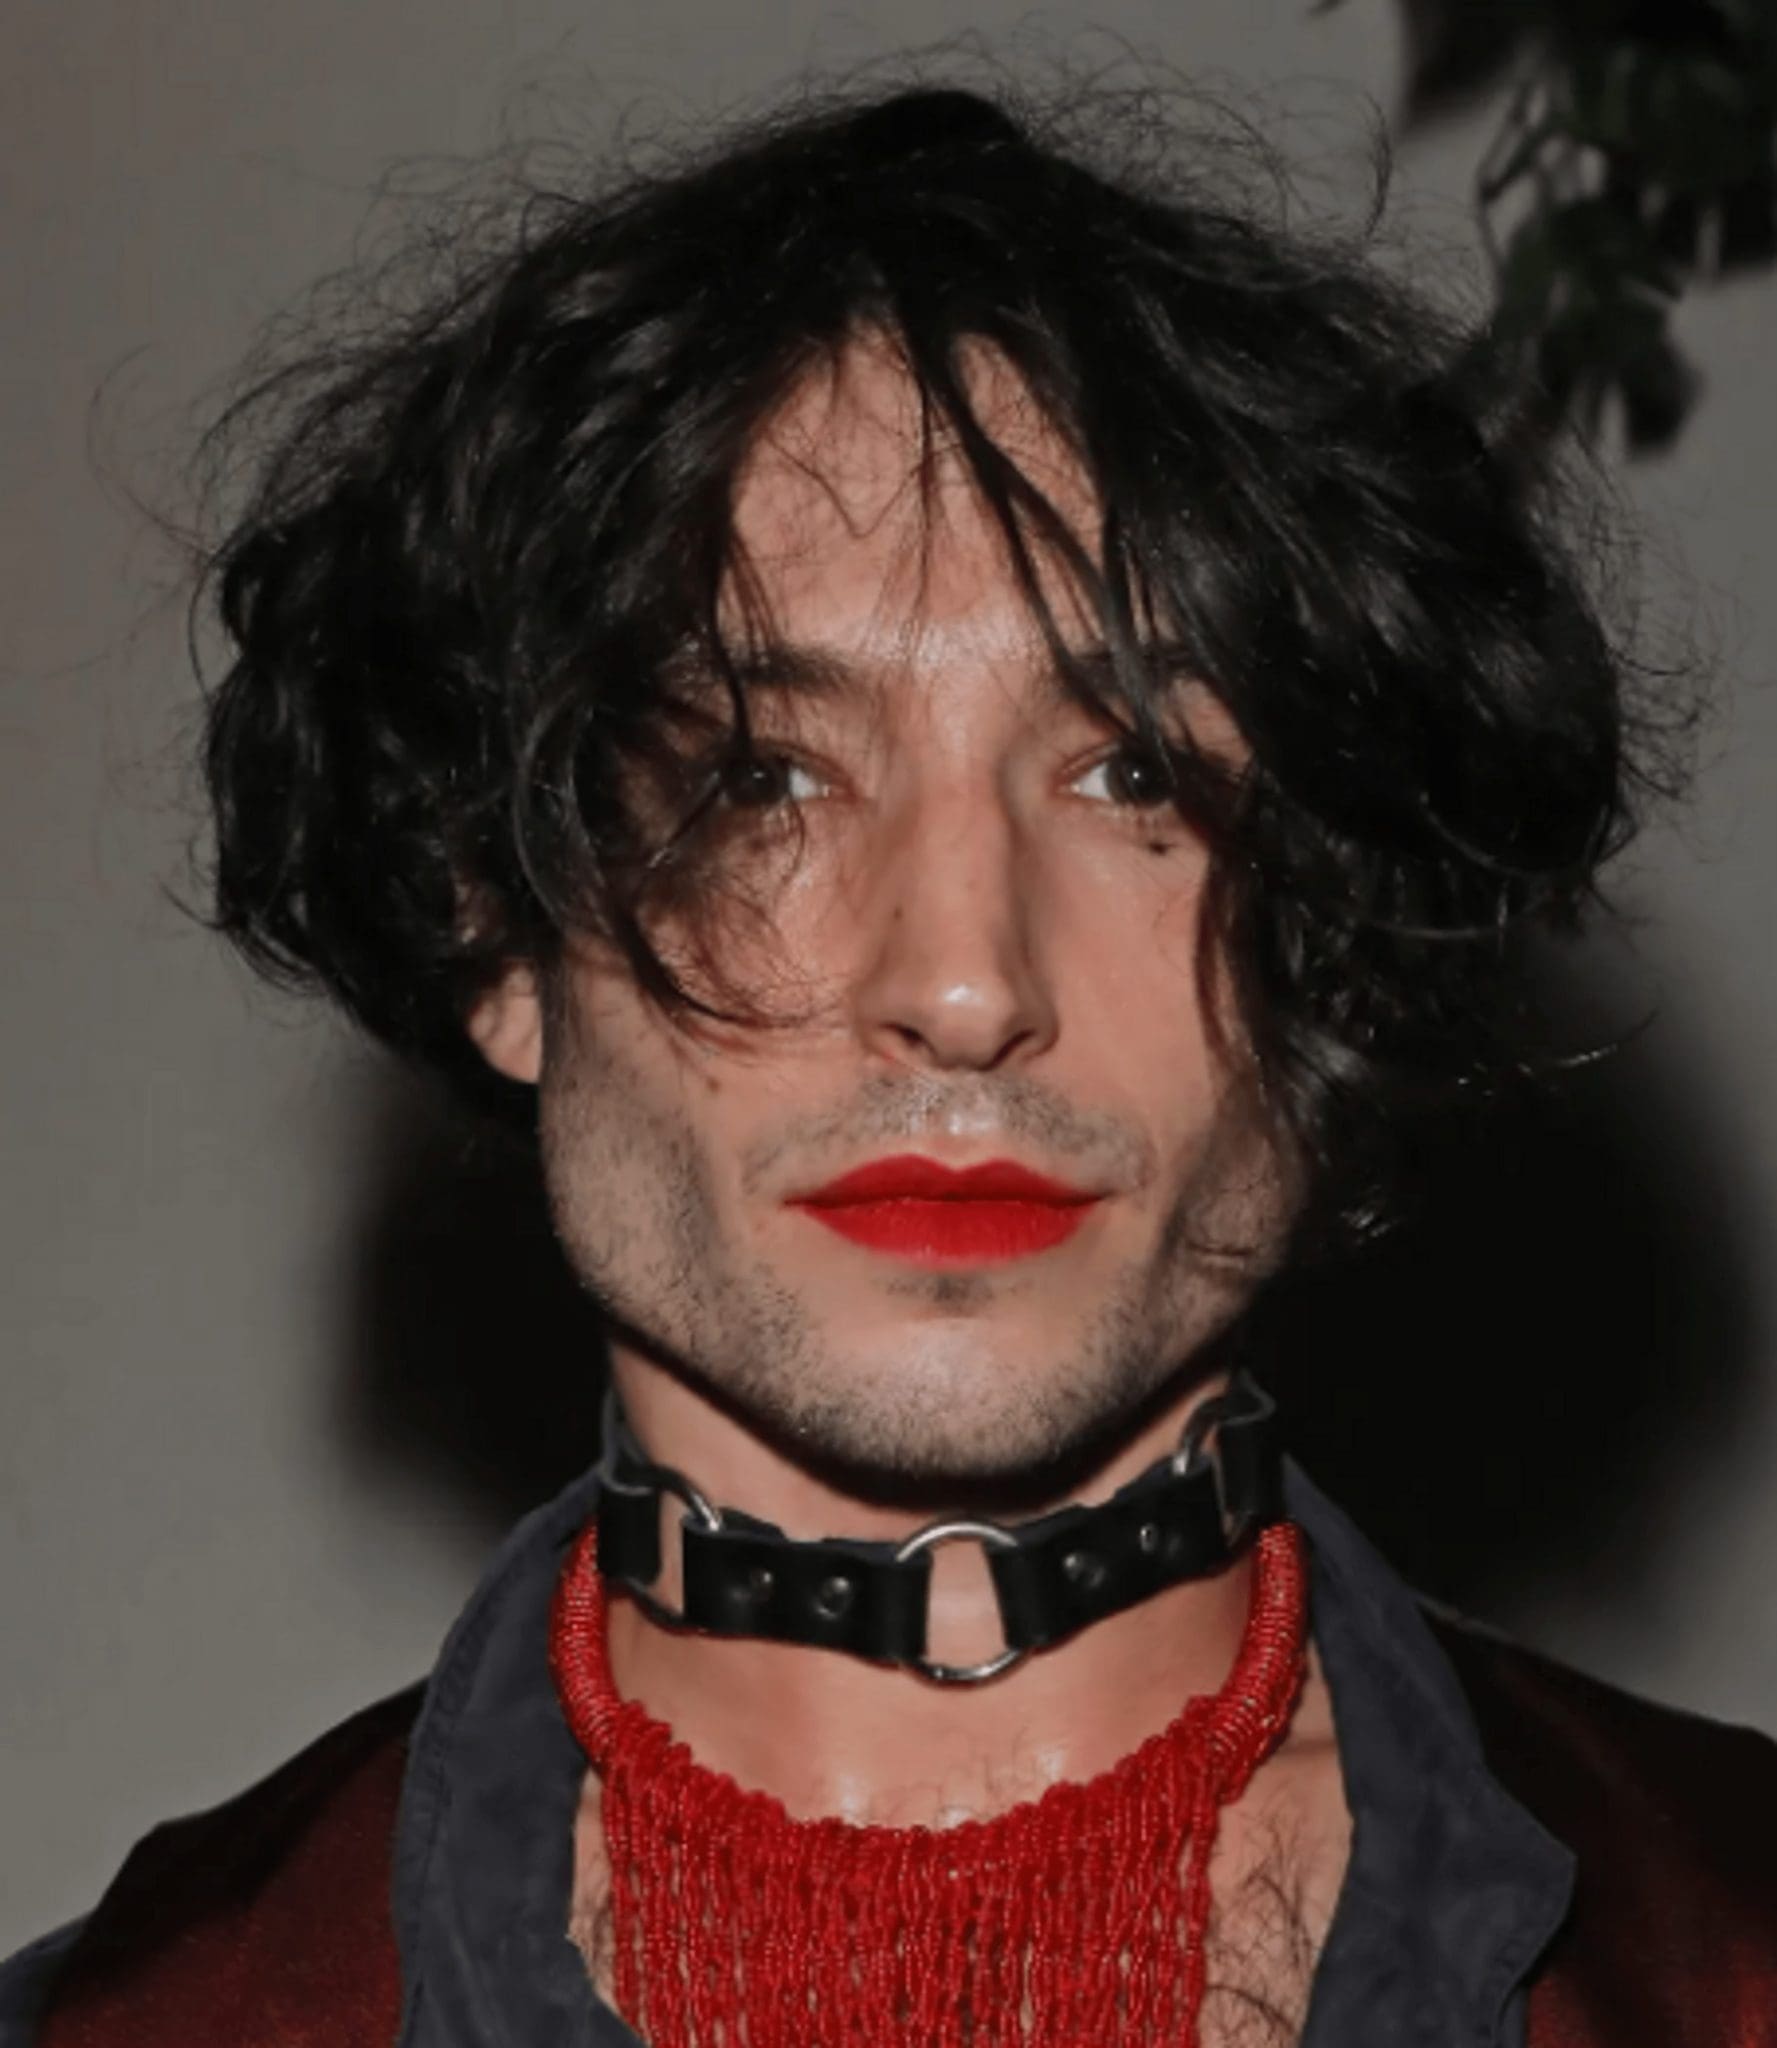 Police Are Looking For A Mother And Two Kids Who Were Allegedly Residing With Ezra Miller